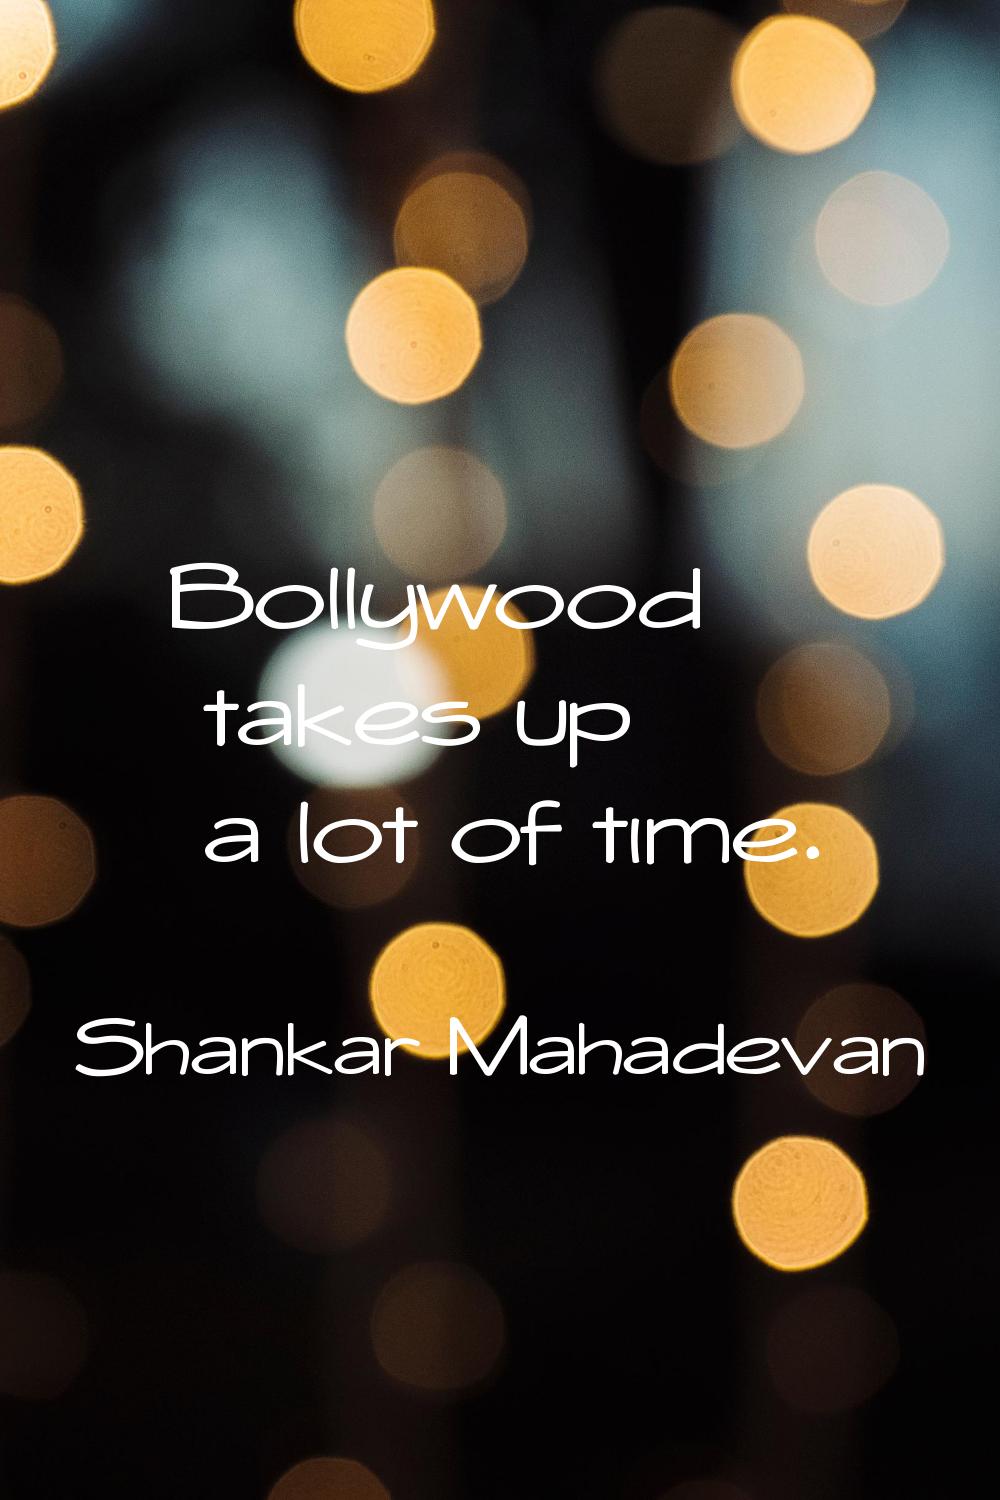 Bollywood takes up a lot of time.